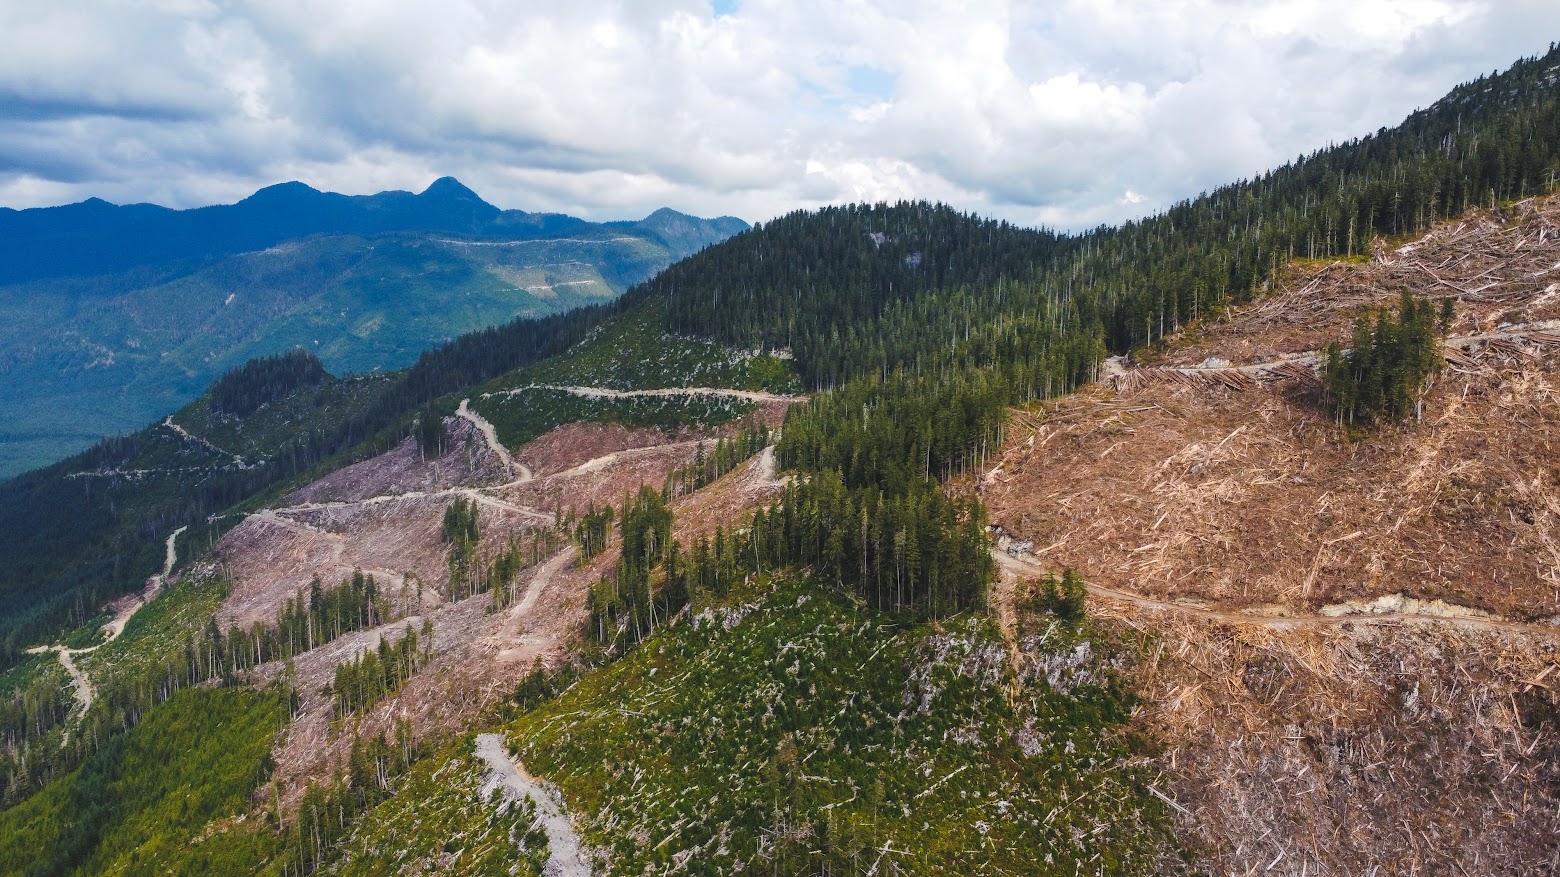 Giant old-growth clearcut in a deferral area  Photo credit: Alex Tsui, Wilderness Committee